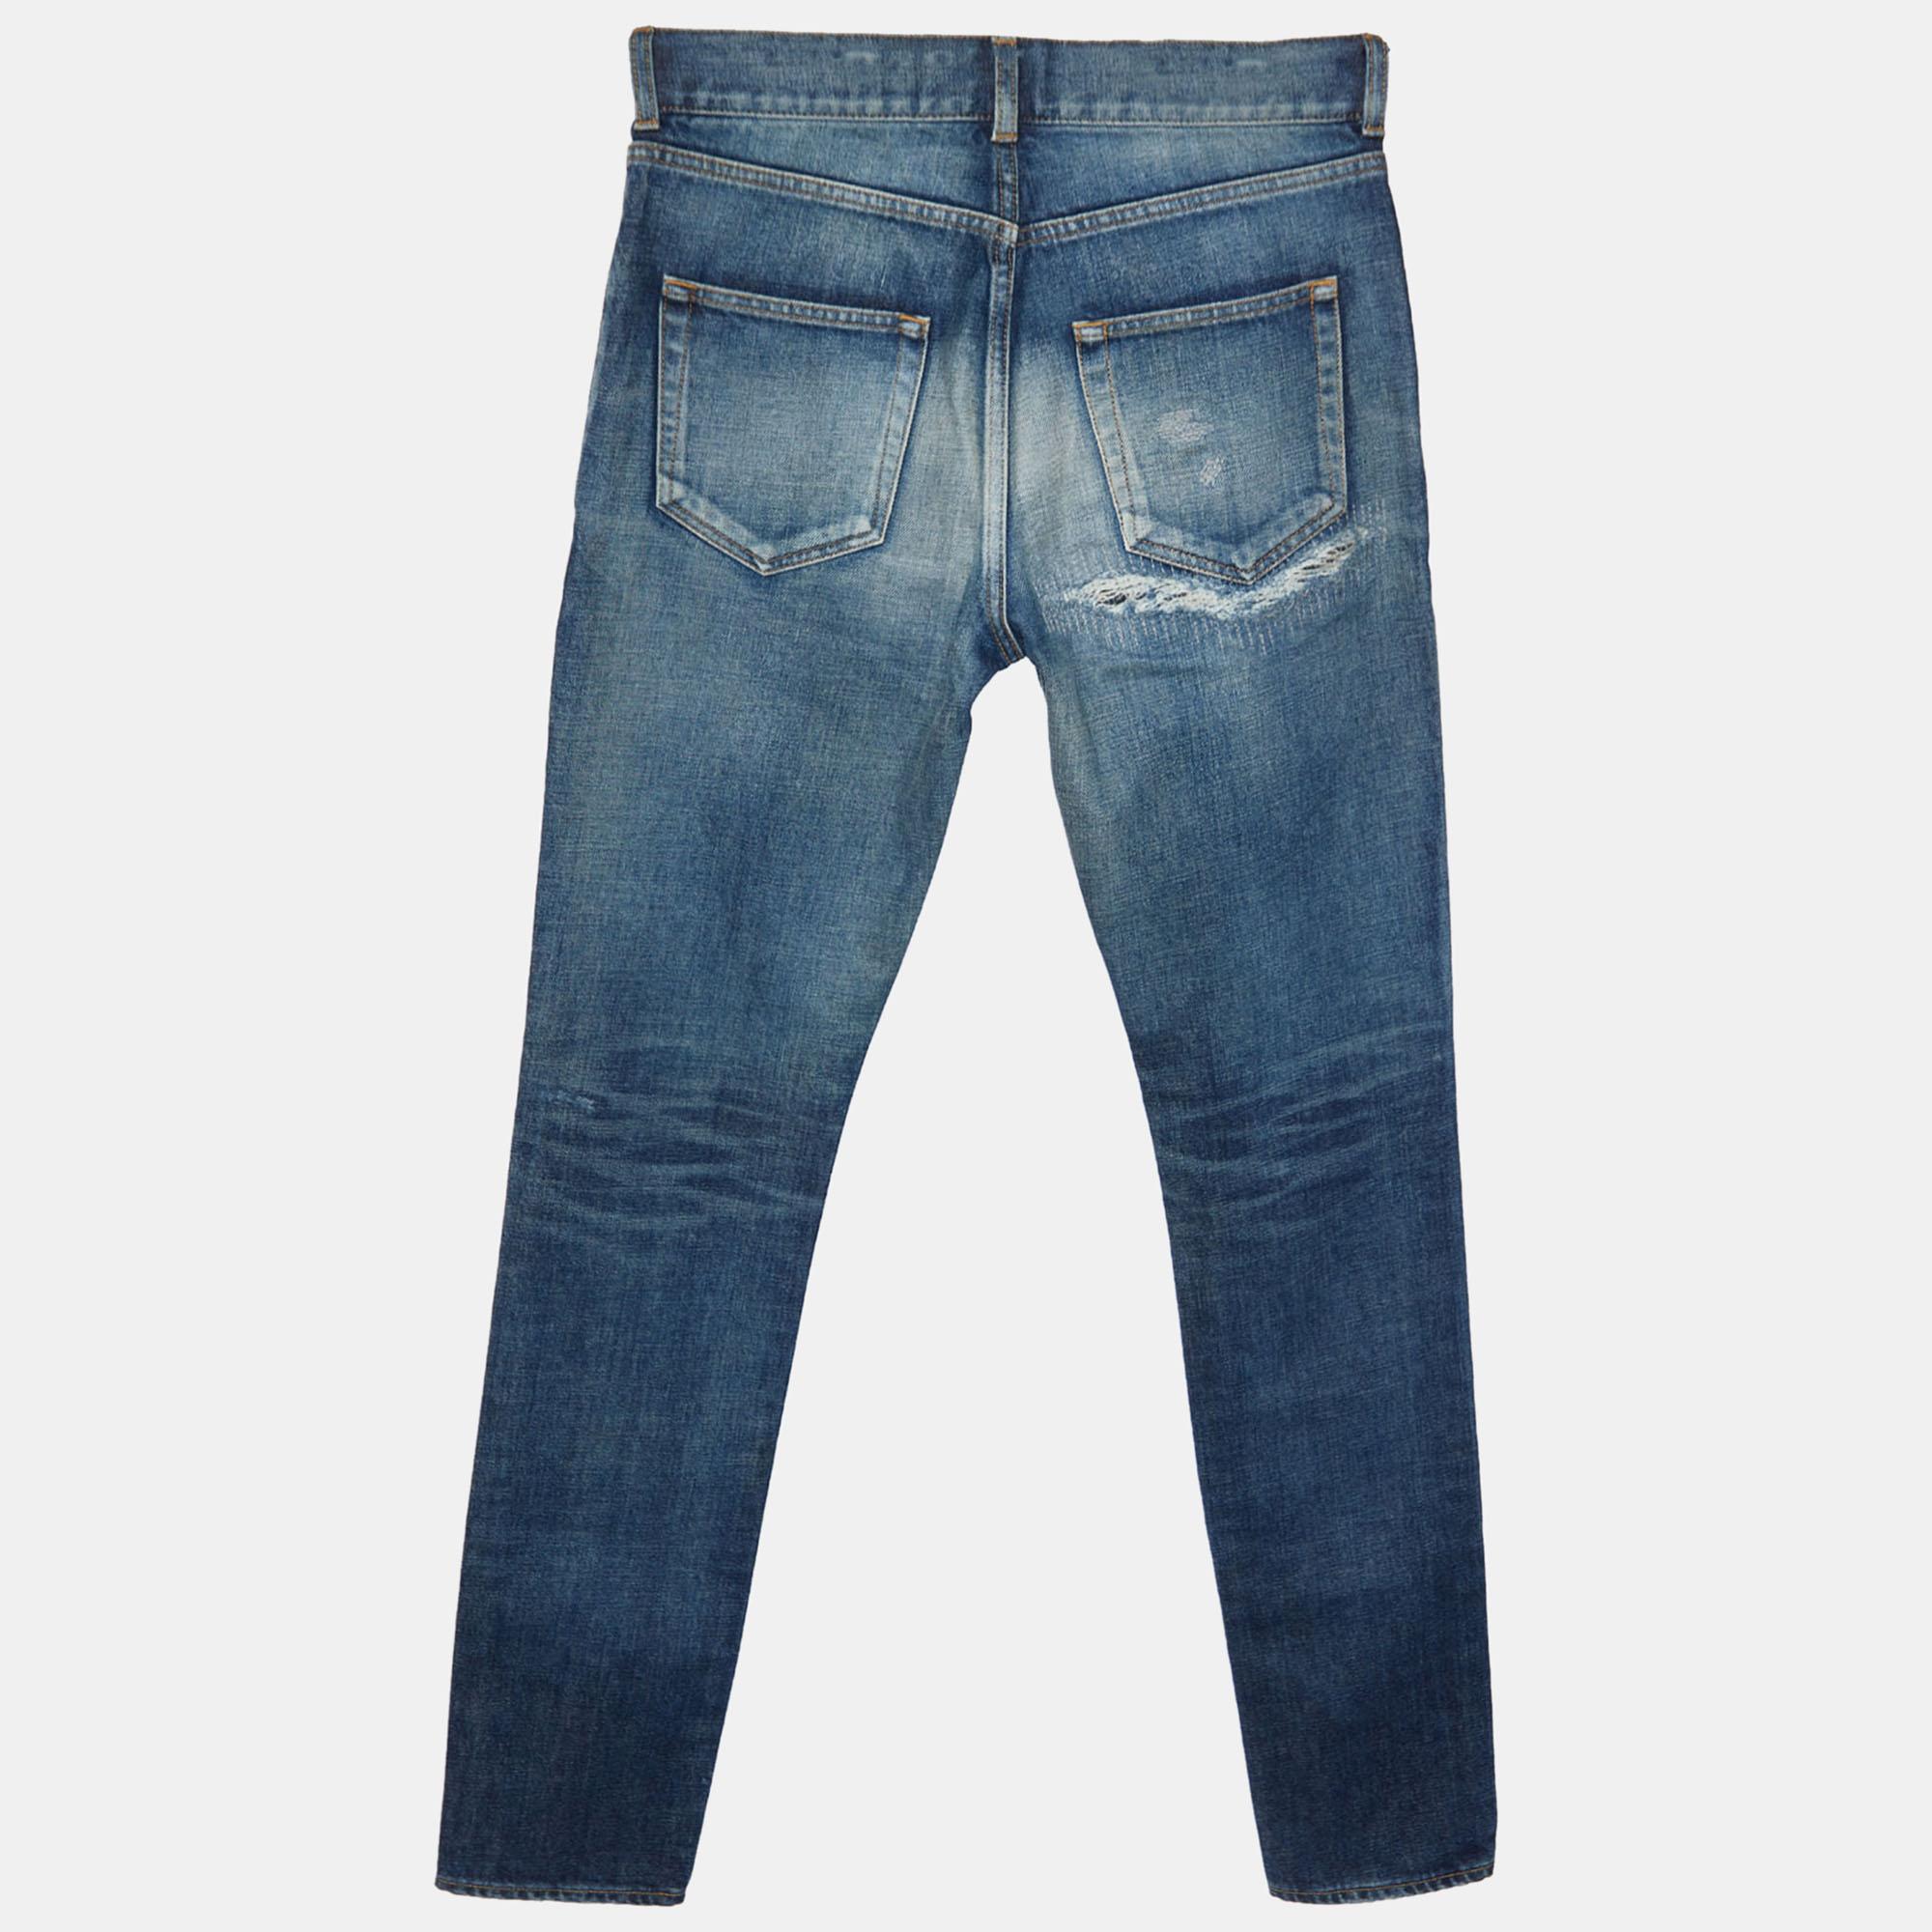 Your wardrobe can never be complete with a great pair of Saint Laurent jeans like this. Tailored from best materials, this pair showcases classic detailing, an easy closure style, and pockets. Pair it with your casual t-shirts.

